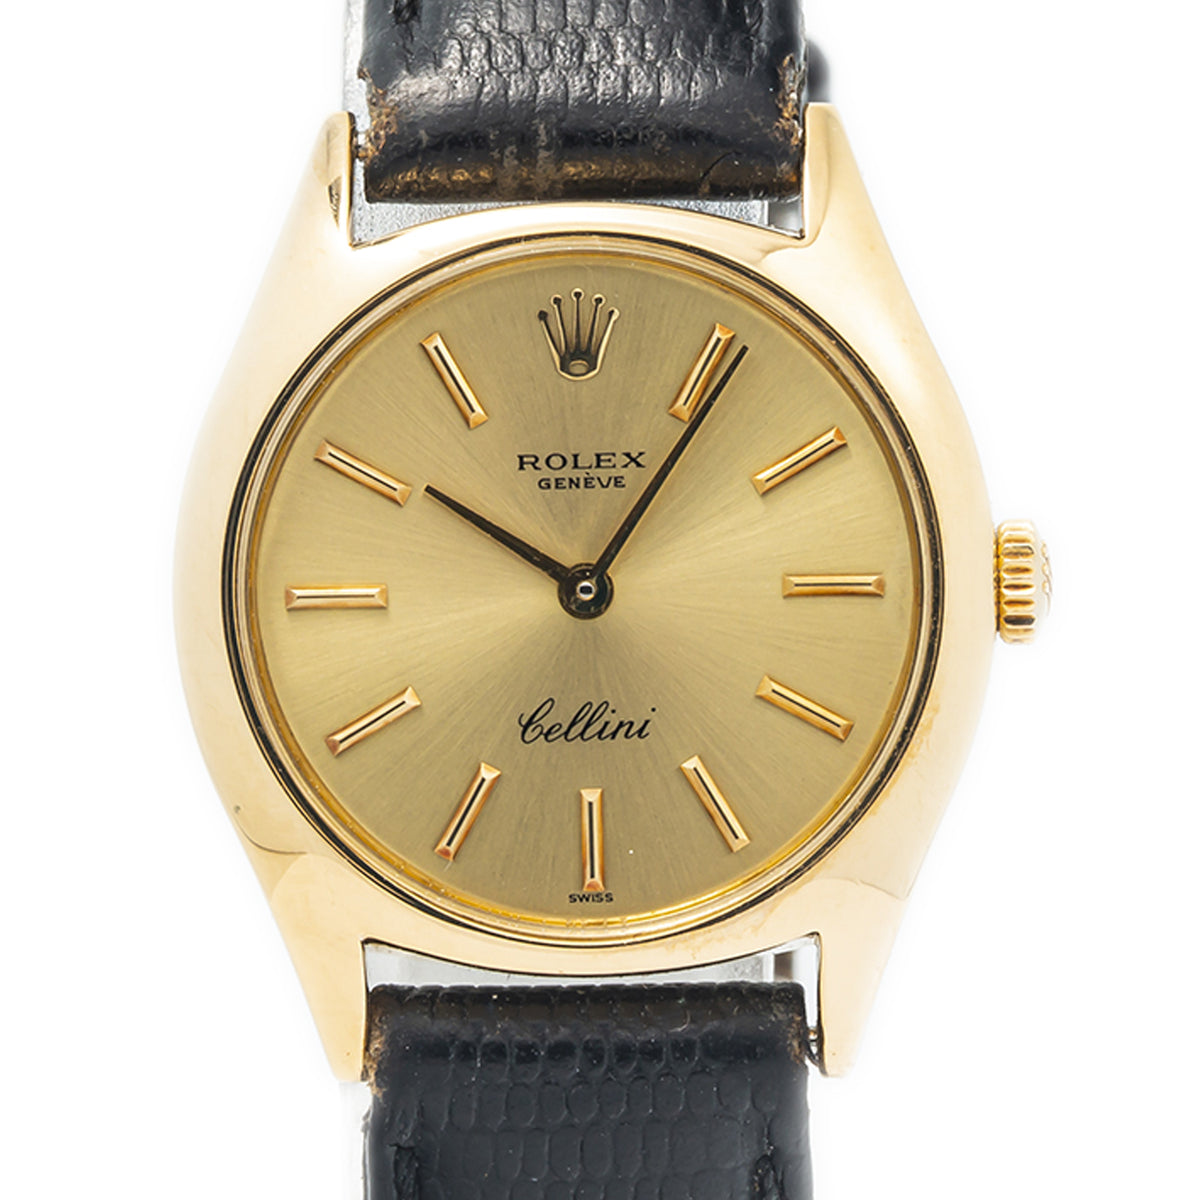 Rolex Cellini 3800 18k Yellow Gold Champagne Dial Manual Winding Watch 26mm